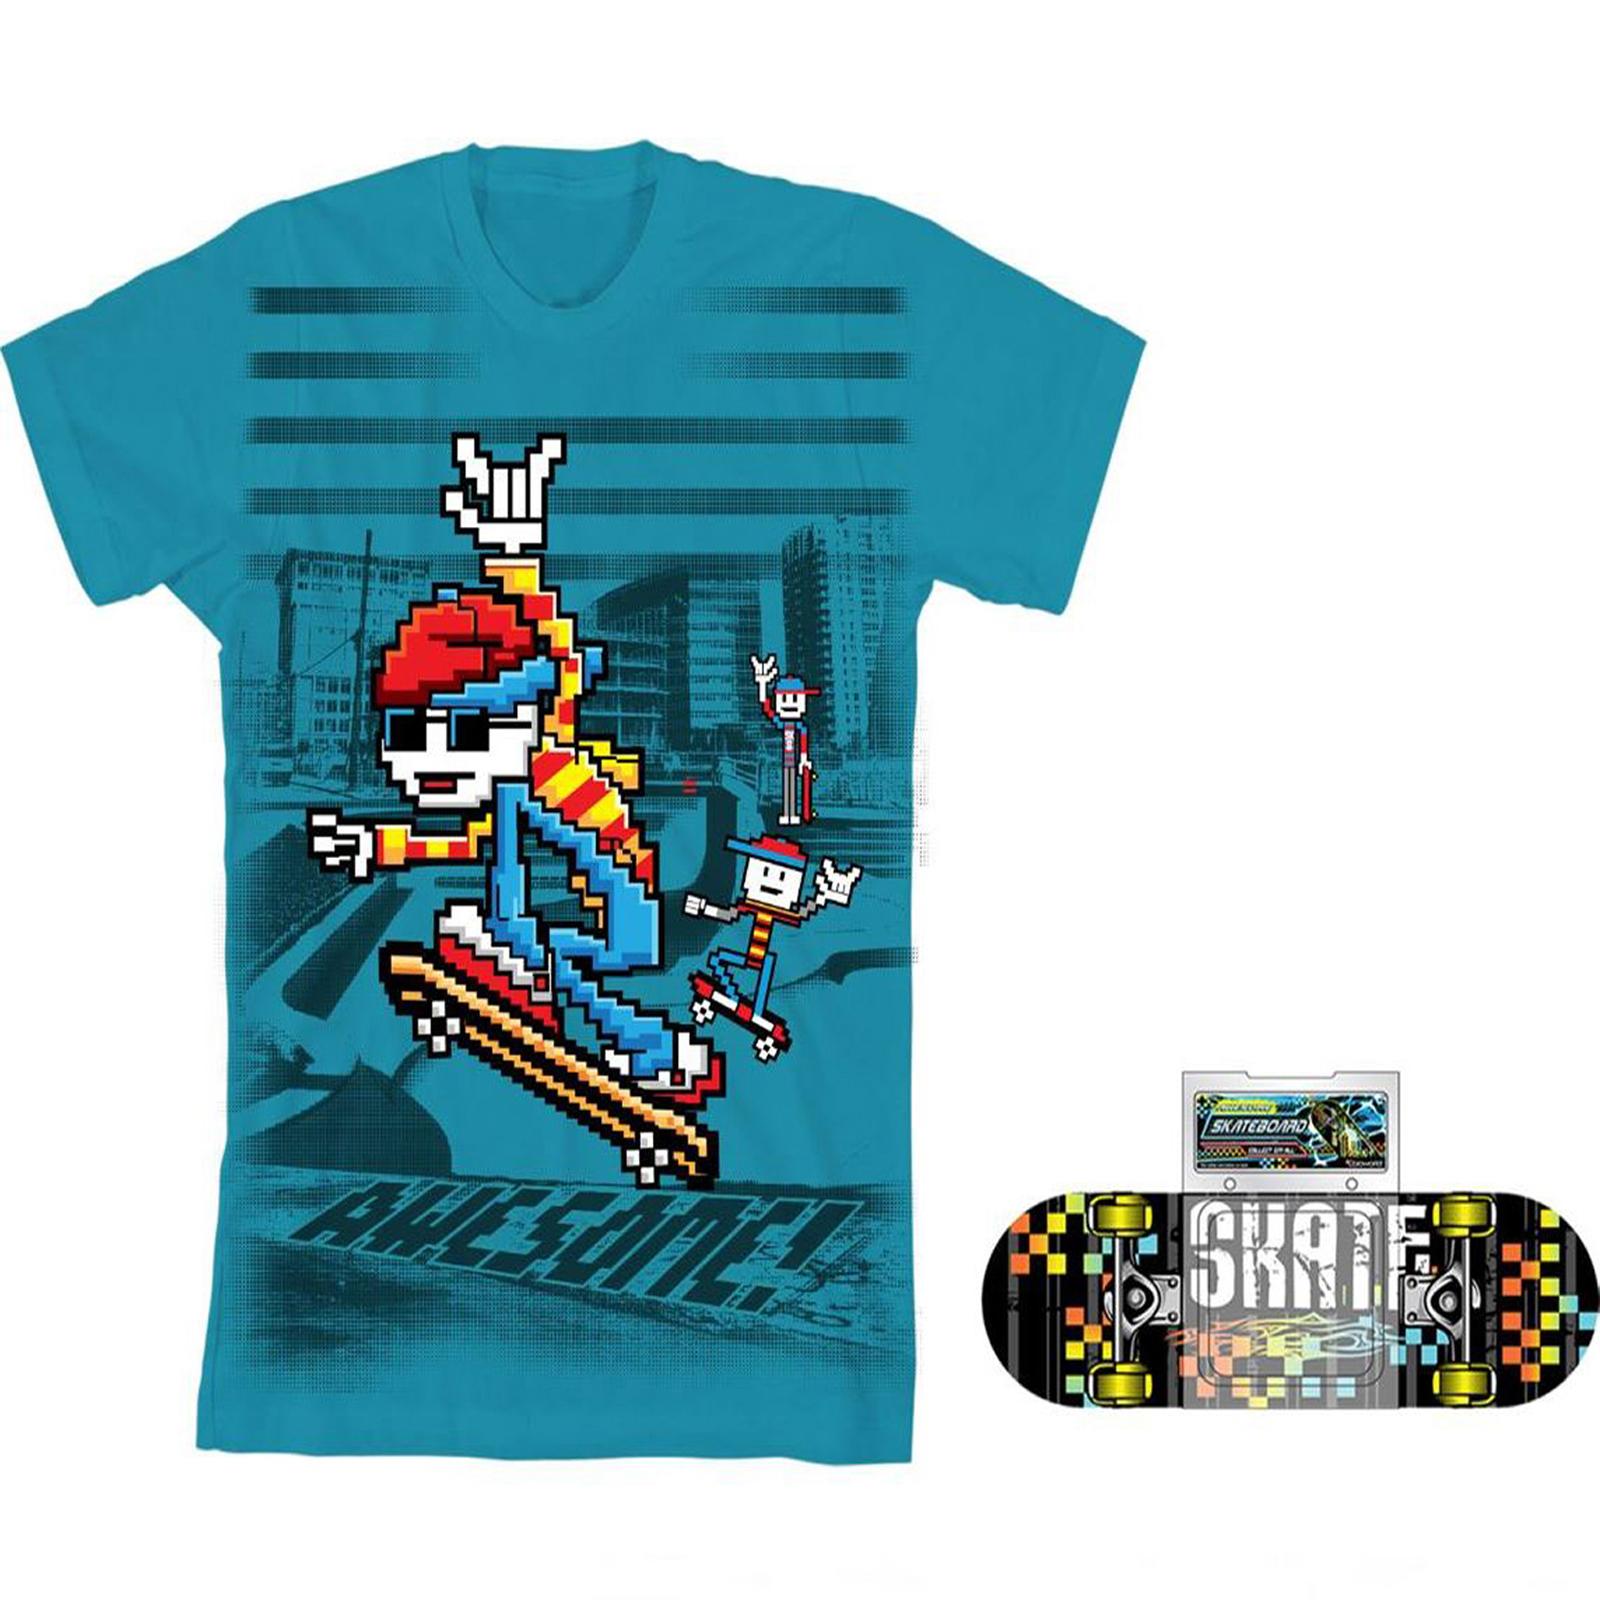 Boy's Graphic T-Shirt & Toy Skateboard - Awesome Skater